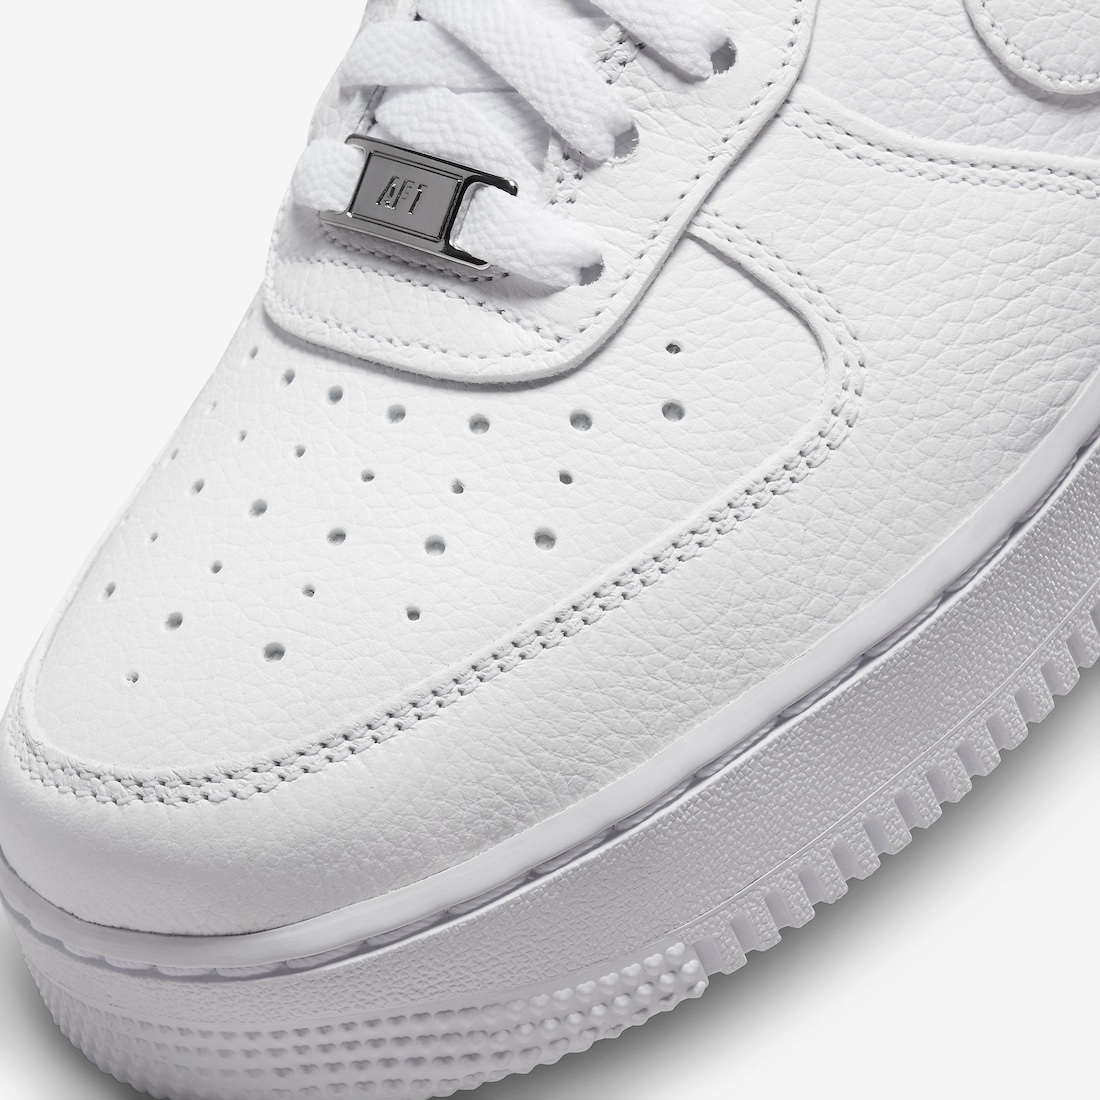 NOCTA Nike Air Force 1 Low Certified Lover Boy White 6